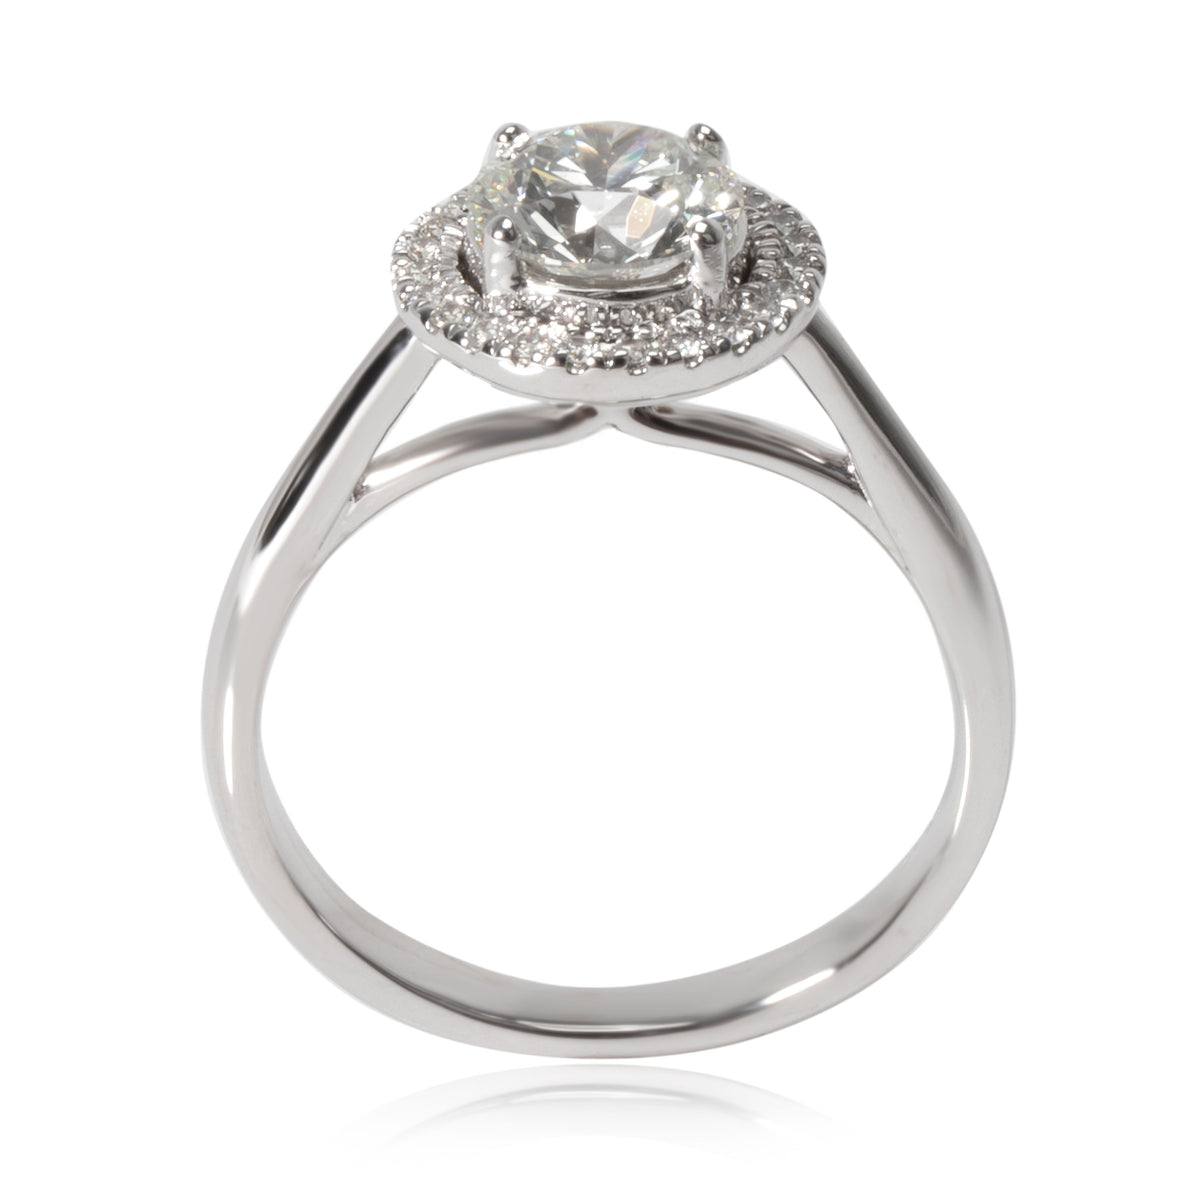 Hearts on Fire Halo Diamond Engagement Ring in 18K White Gold J VVS2 1.2 CTW